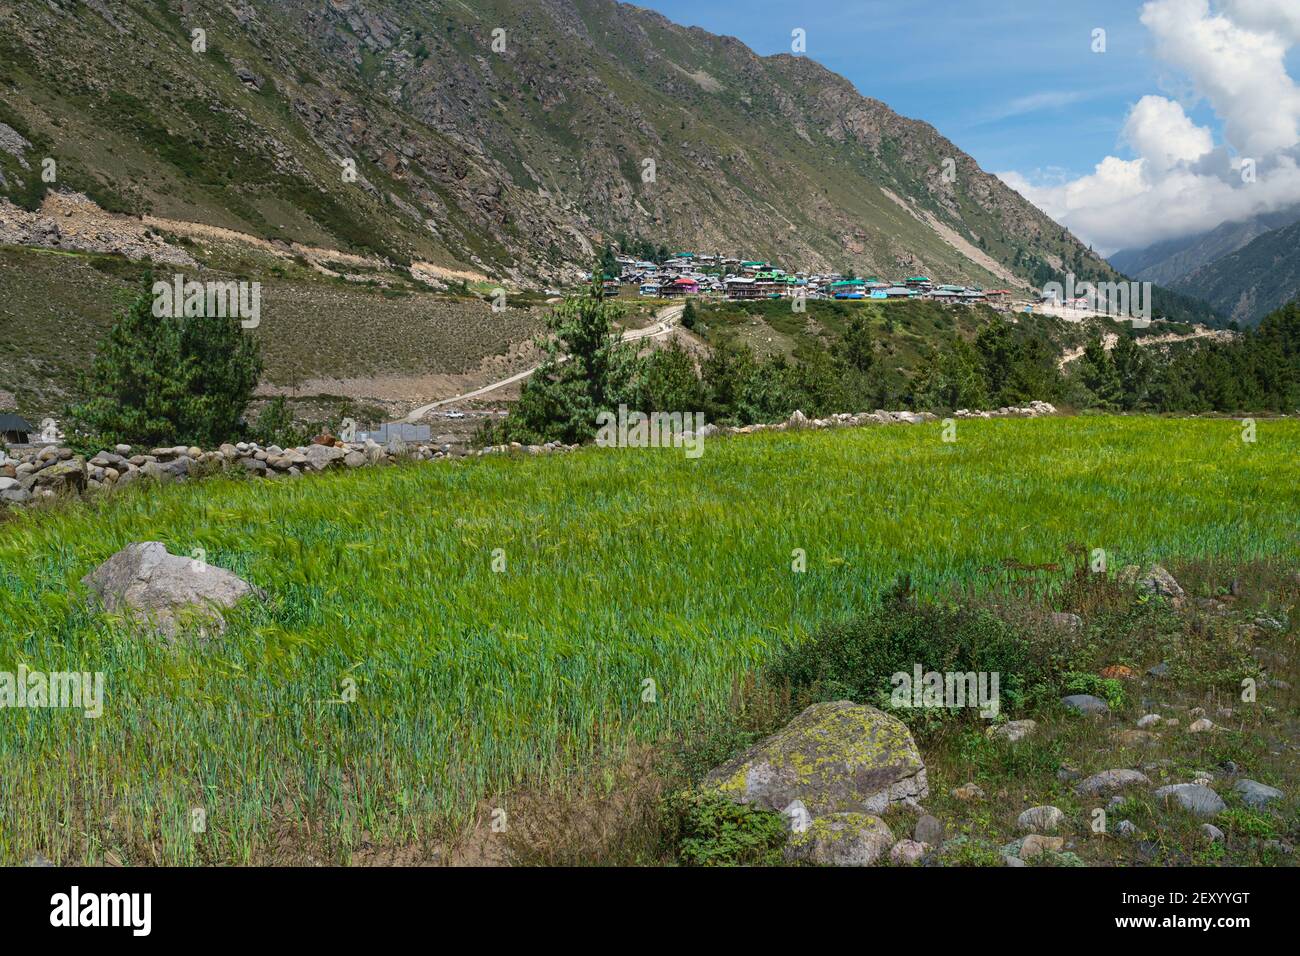 Terraced wheat field and crop flanked by Himalayas and steep rugged slopes under blue sky with clouds near Chitkul, Himachal Pradesh, India. Stock Photo